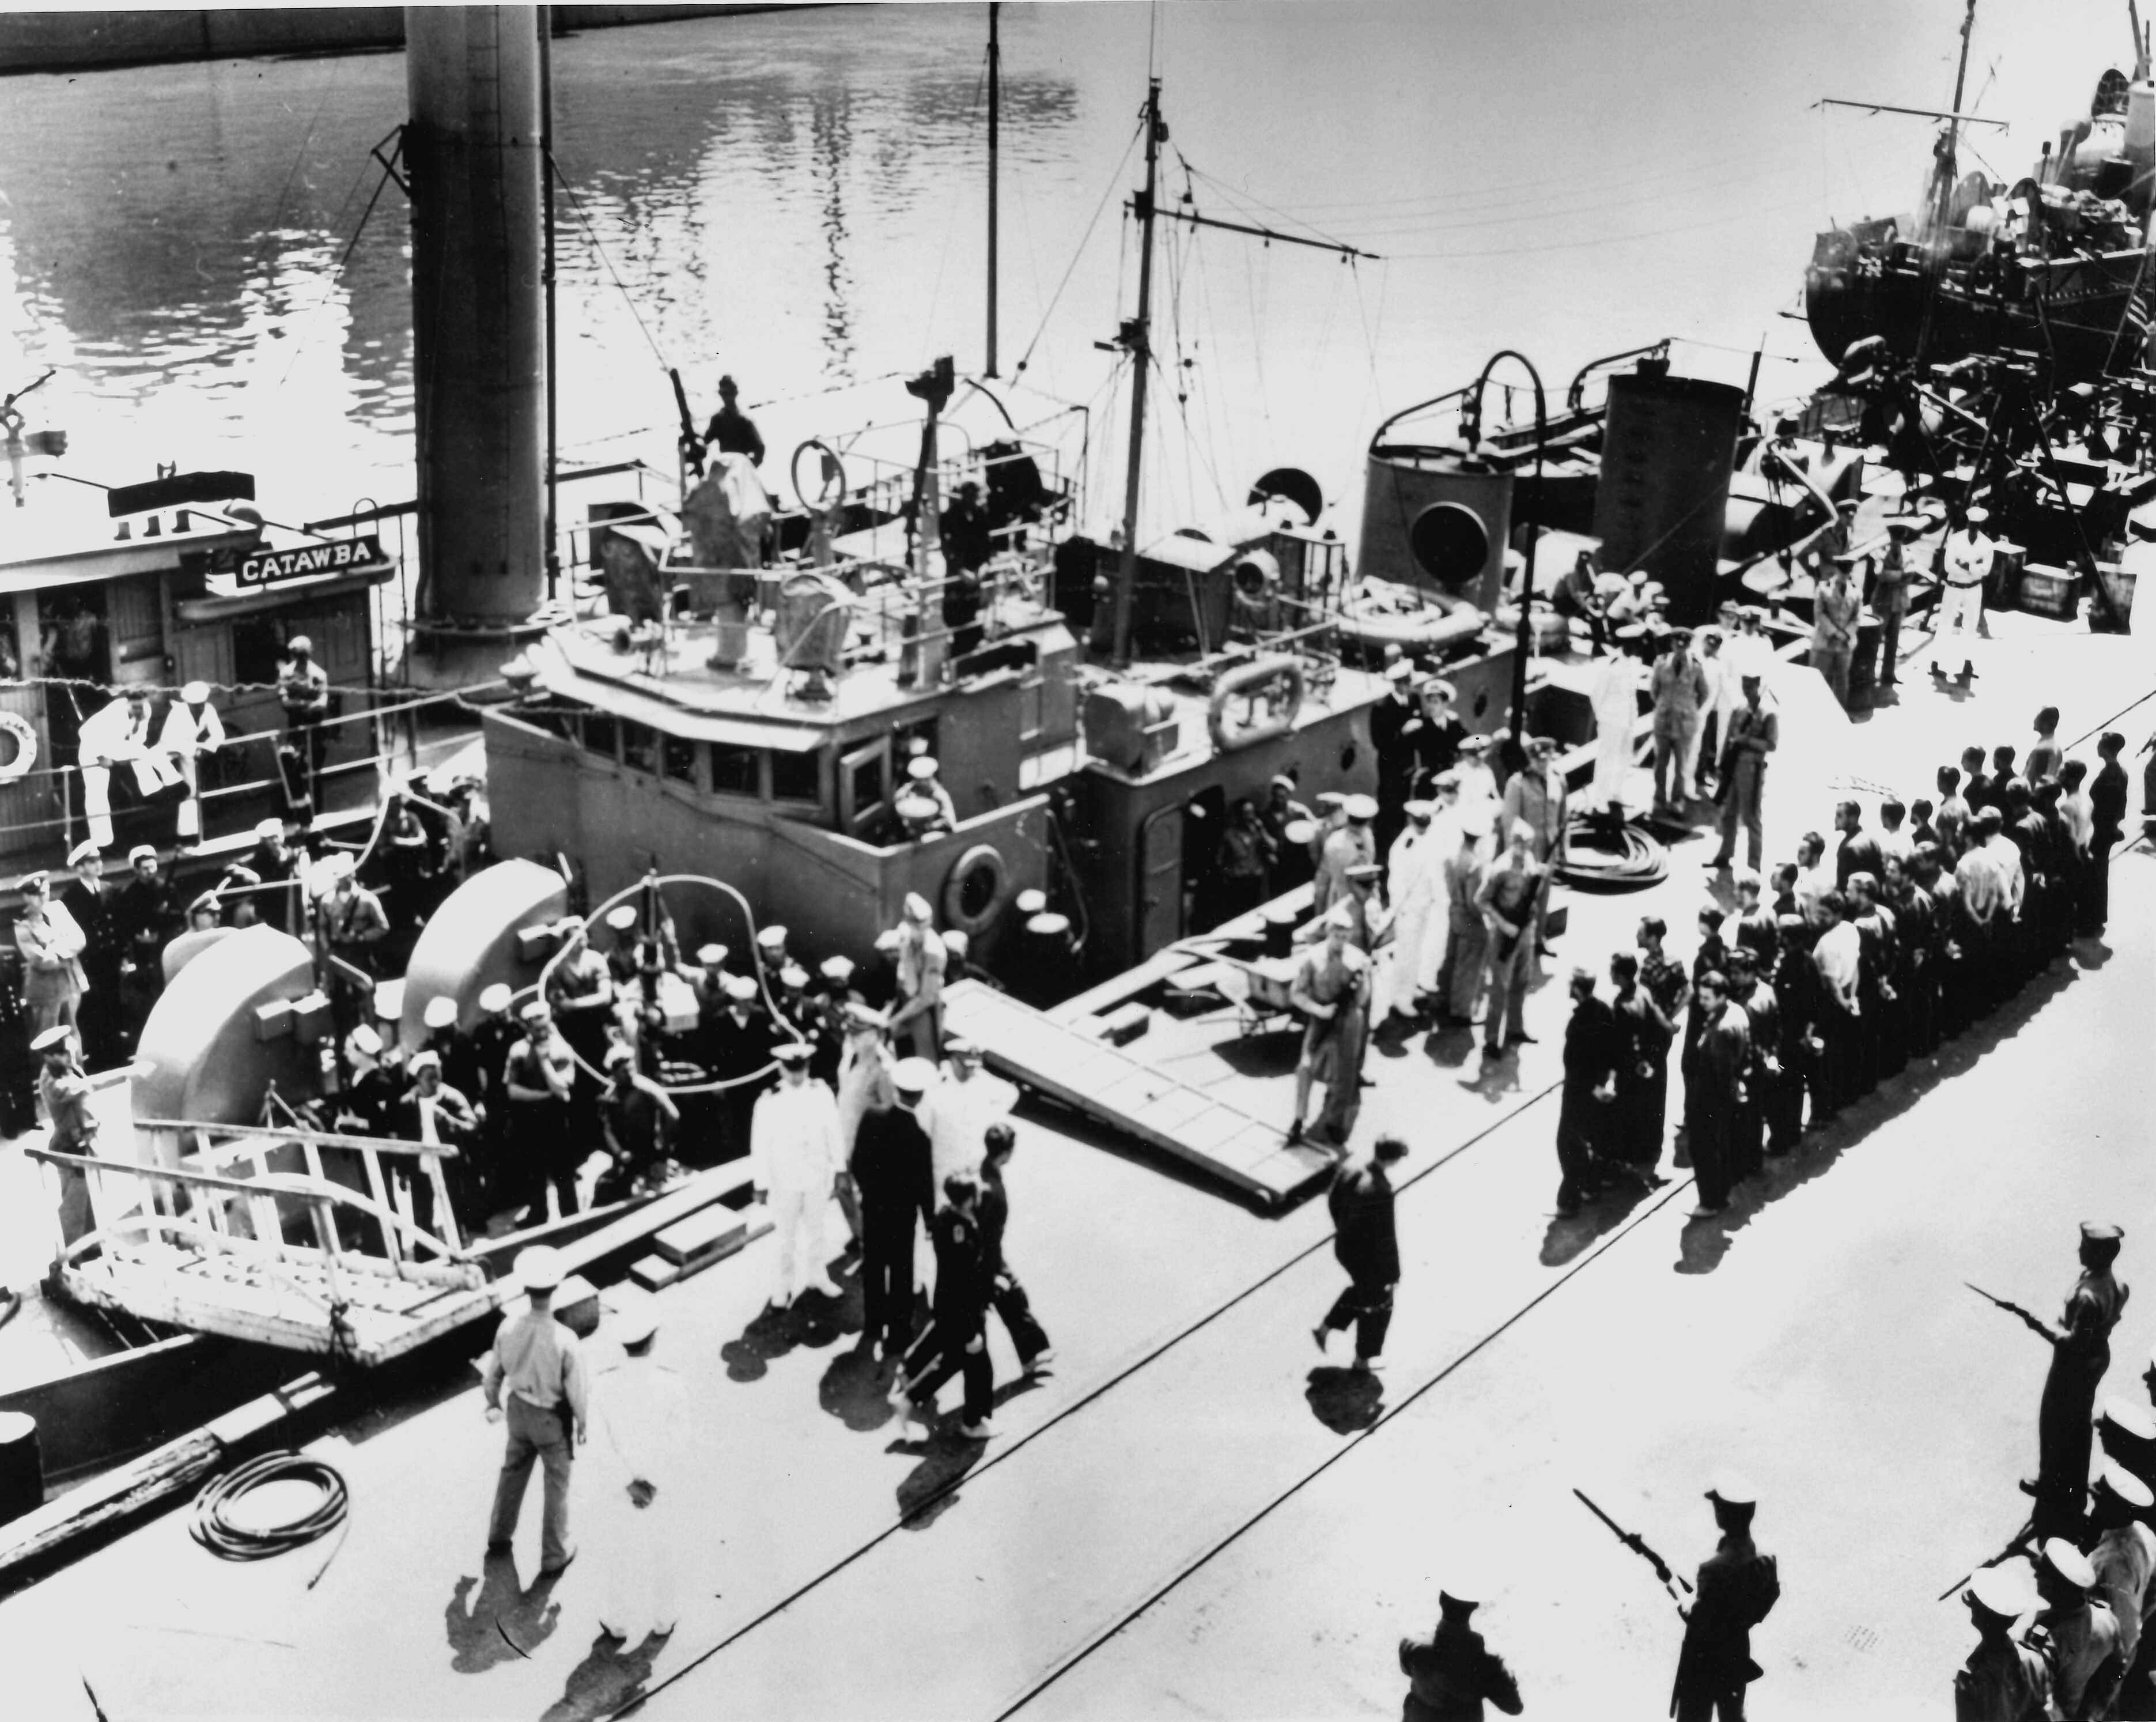 First German POWs captured by U.S. forces are marched off Cutter Icarus onto the docks at the former Charleston Navy Yard, now Coast Guard Base Charleston. The cutter sank their submarine, U-352, in May 1942 off the North Carolina coast. (U.S. Coast Guard)